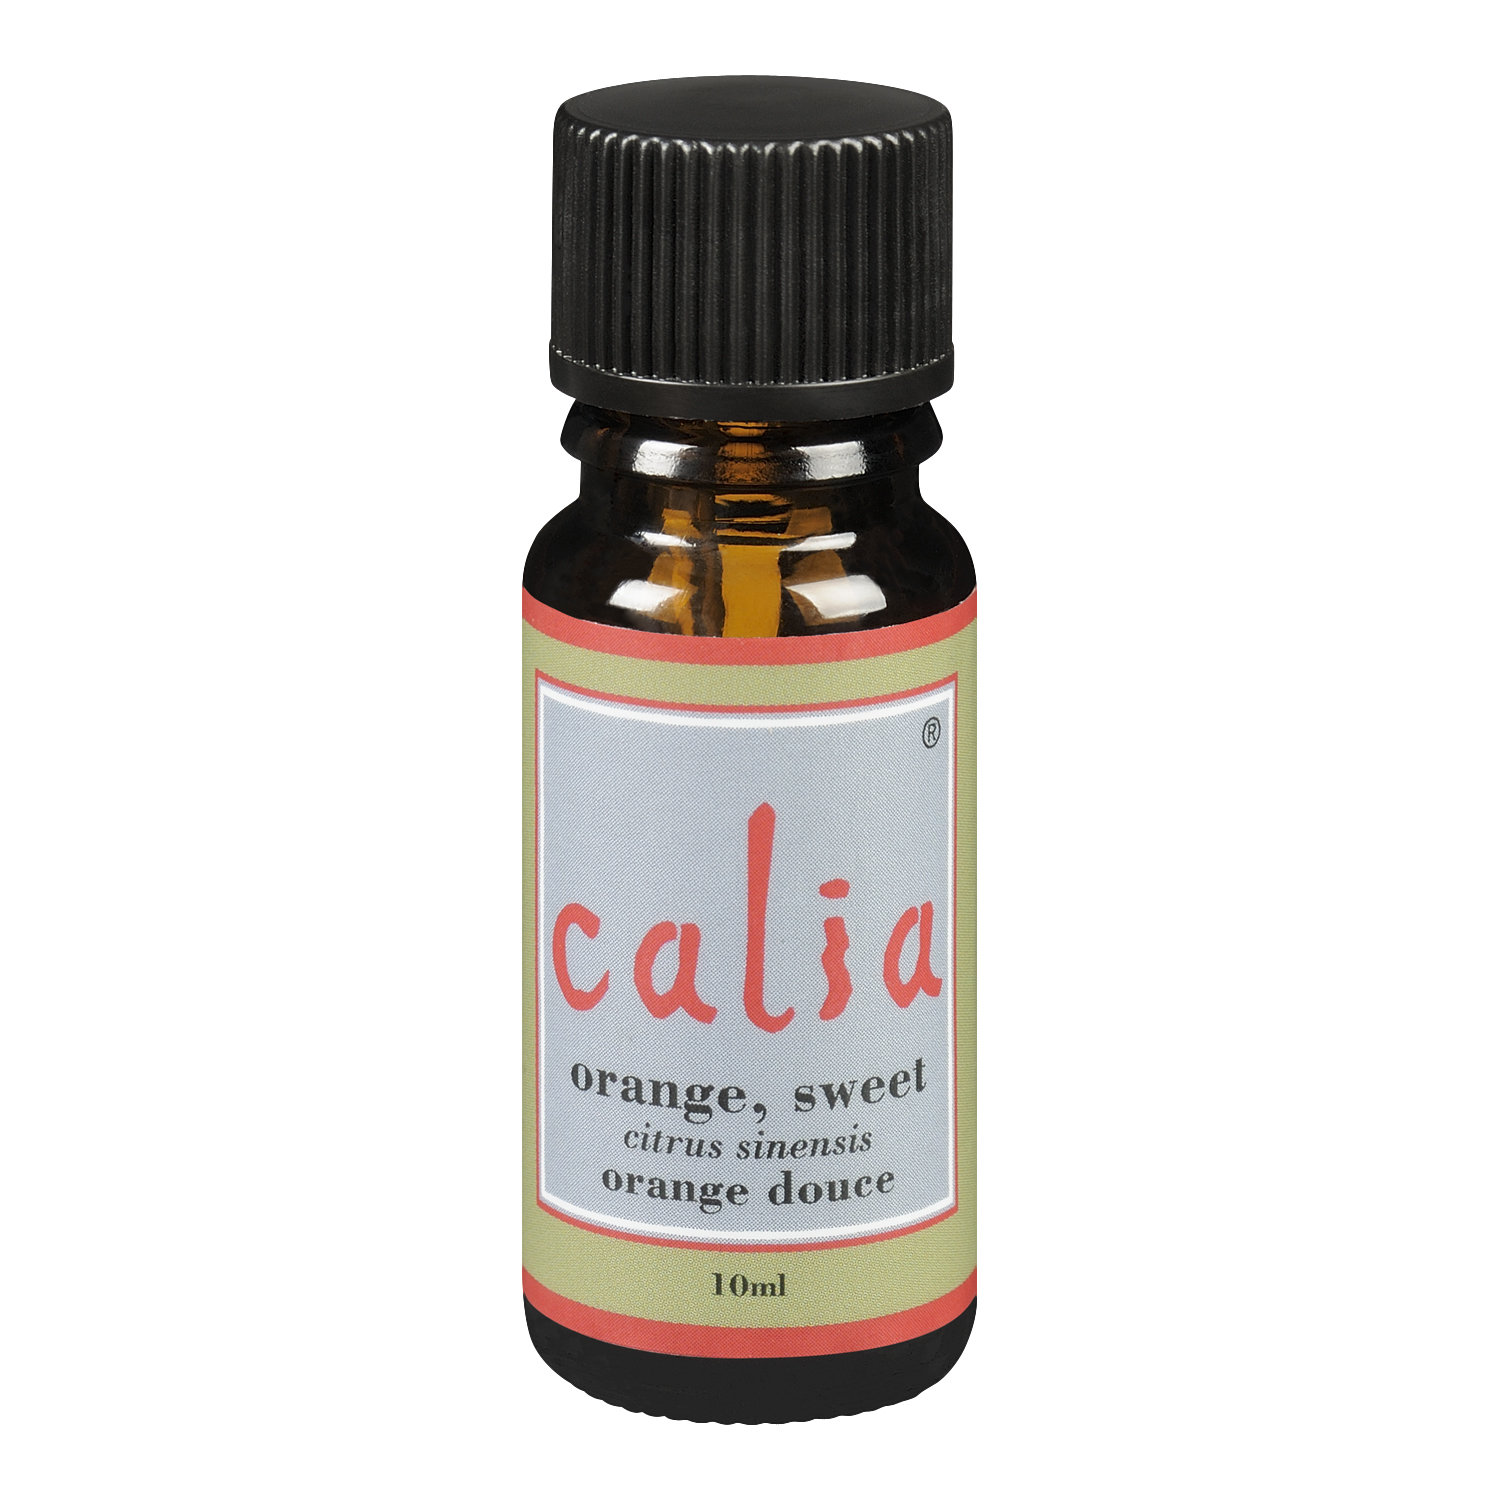 Calia - Essential Oil - Peppermint Pure - Save-On-Foods